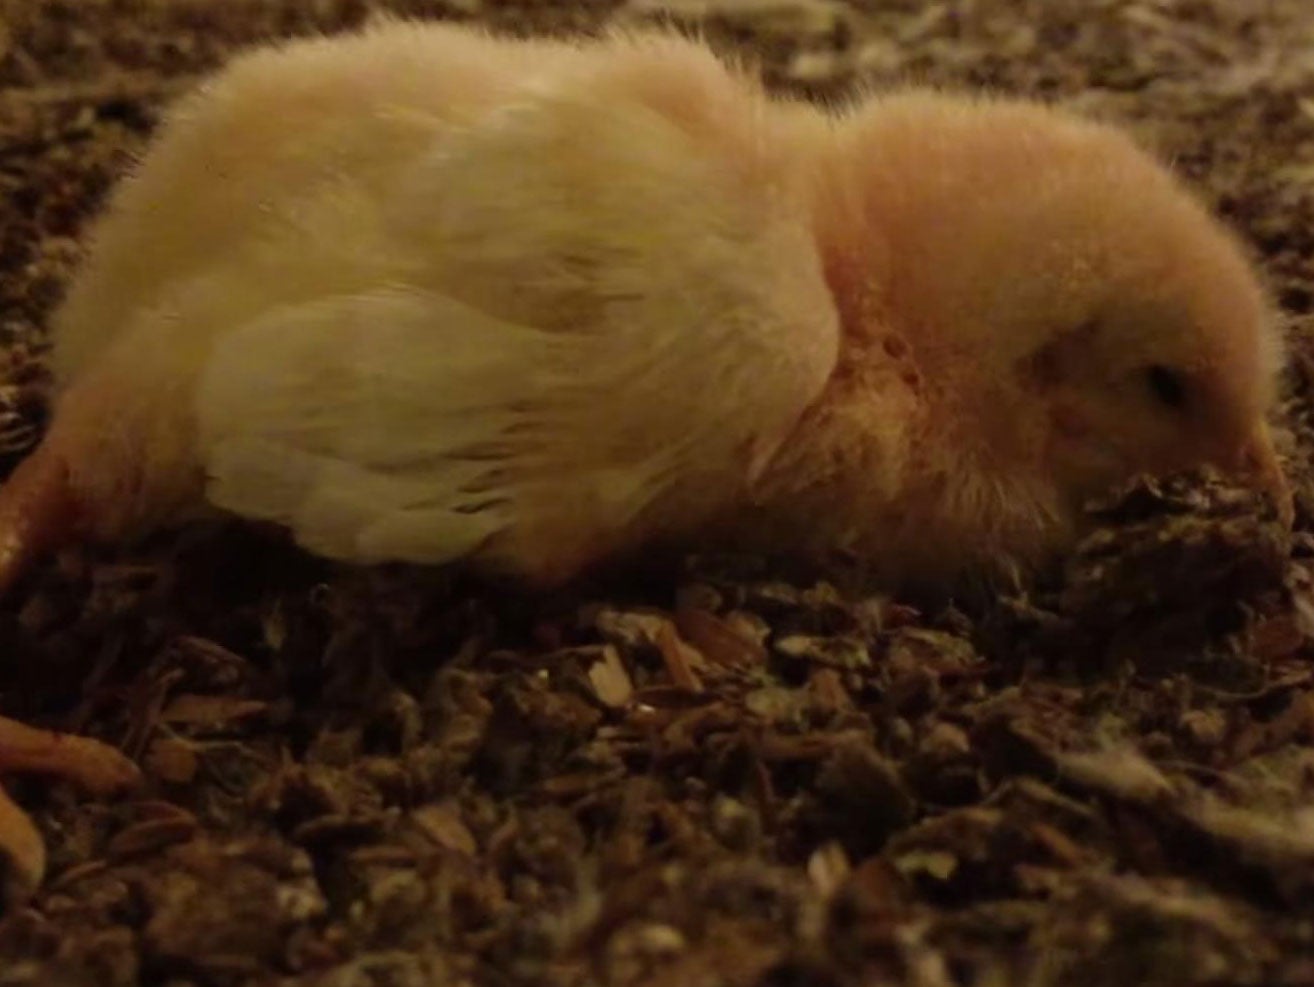 Baby chicks were unable to move after being thrown out of crates on to the ground